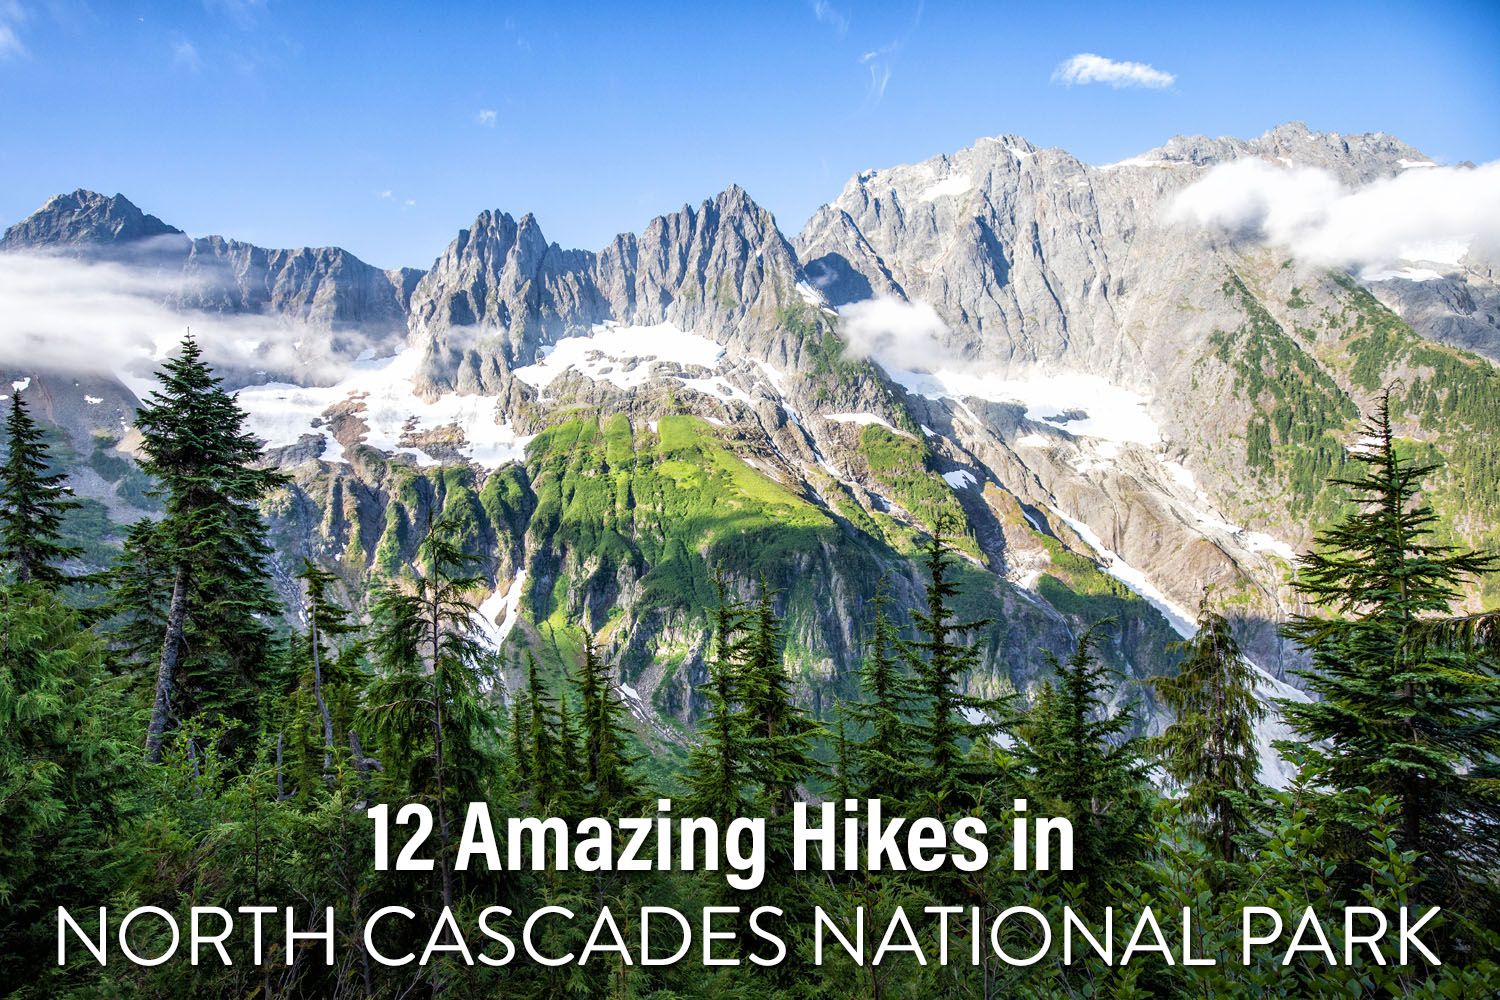 Hikes in North Cascades